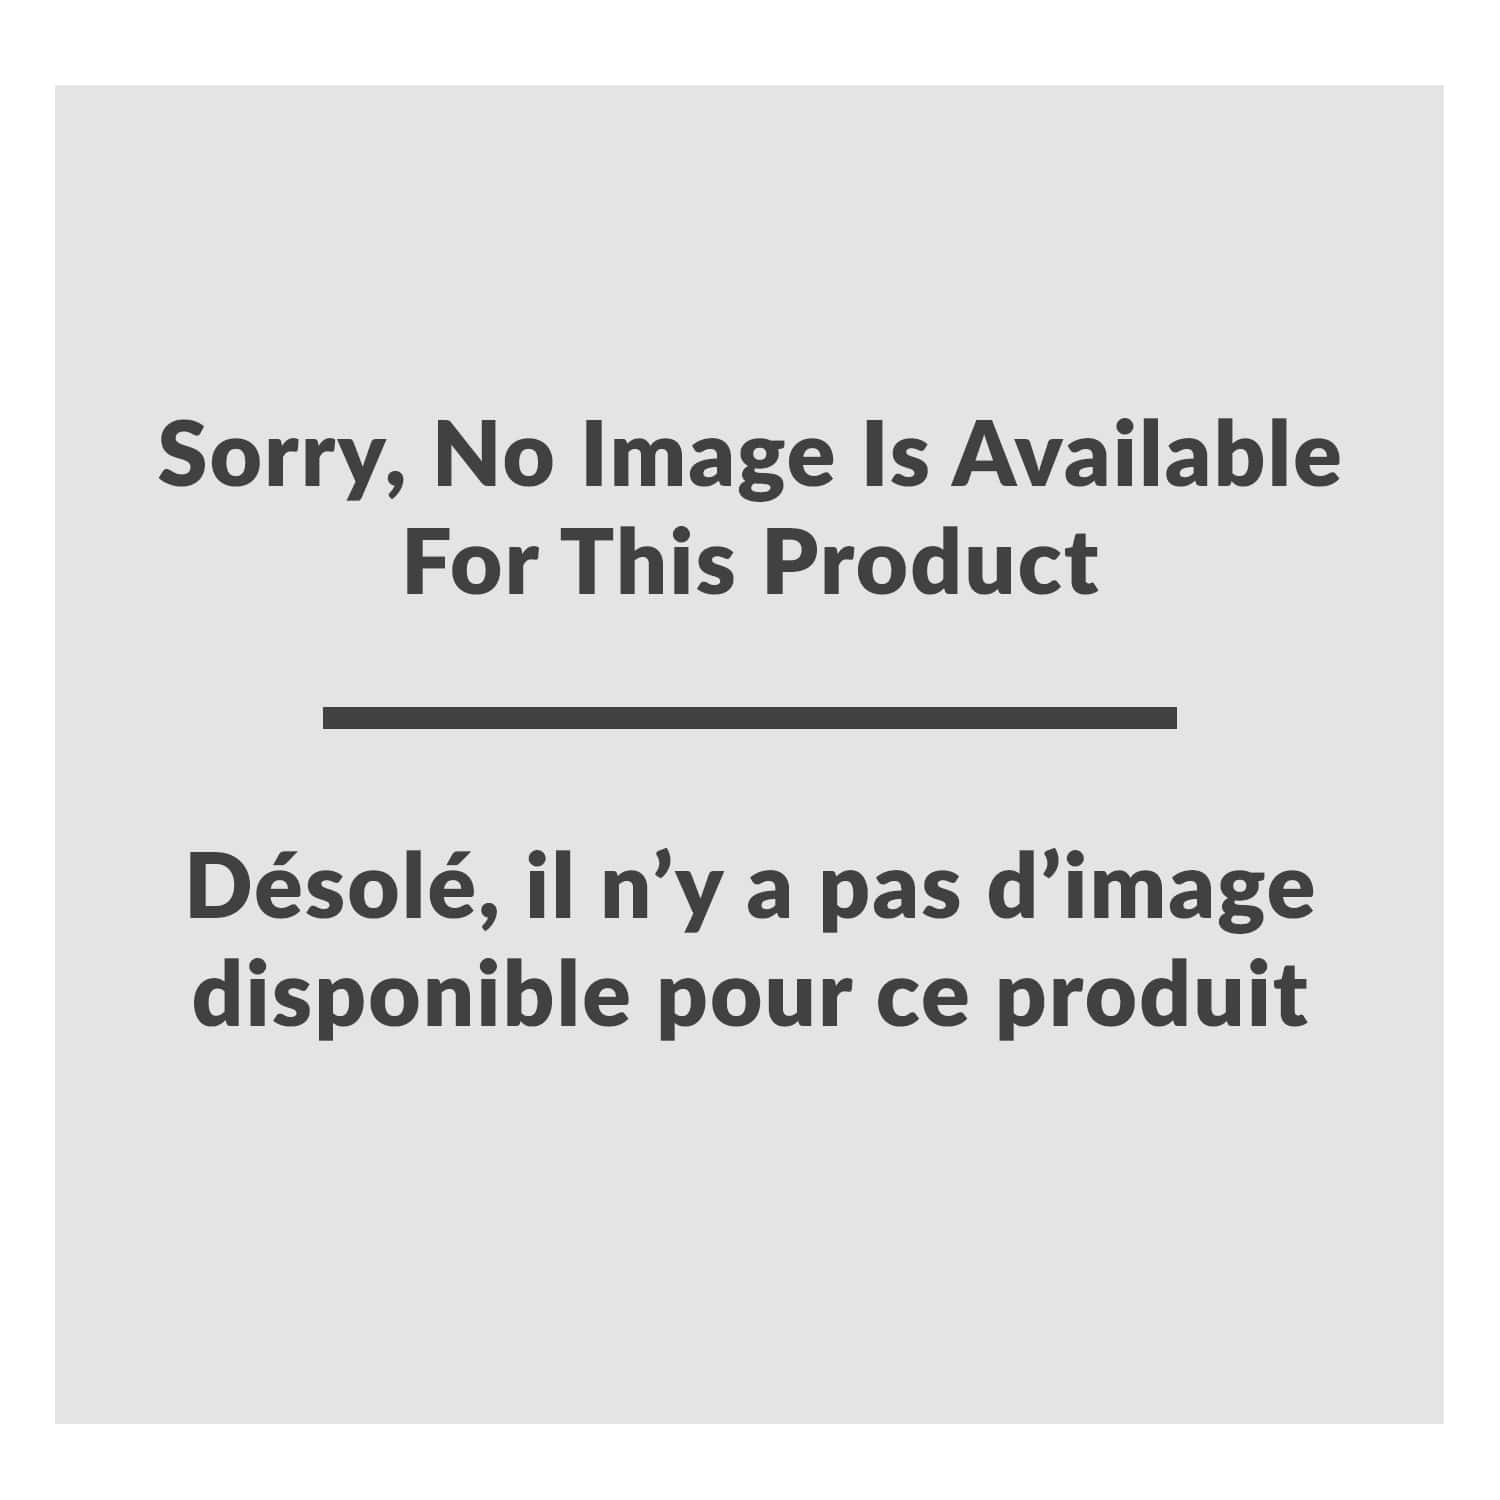 https://media-www.canadiantire.ca/no_product_image_available.png